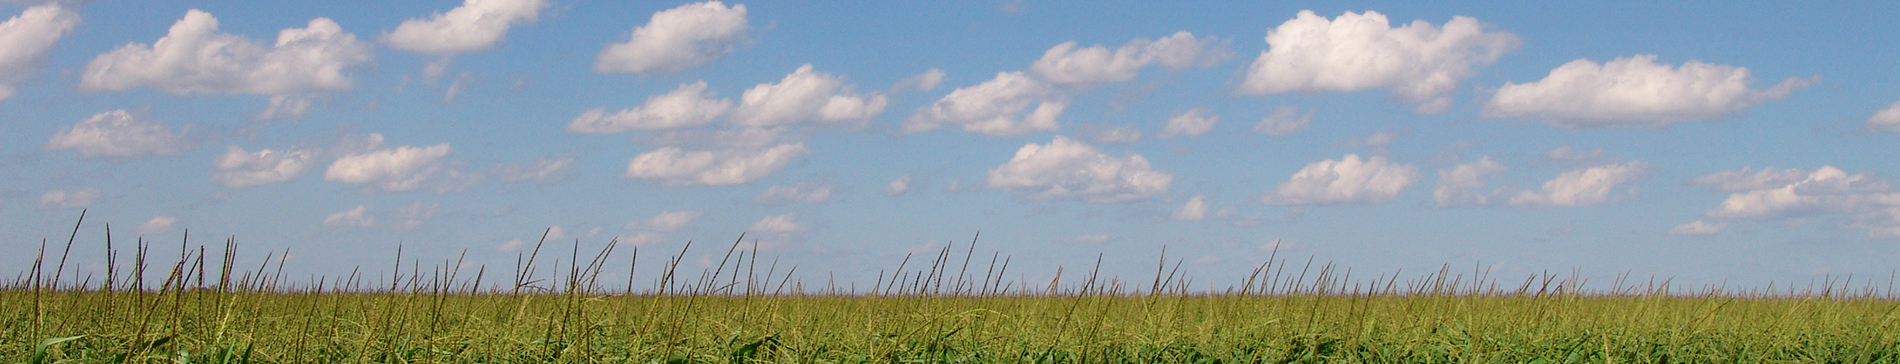 grassy field and blue sky with clouds